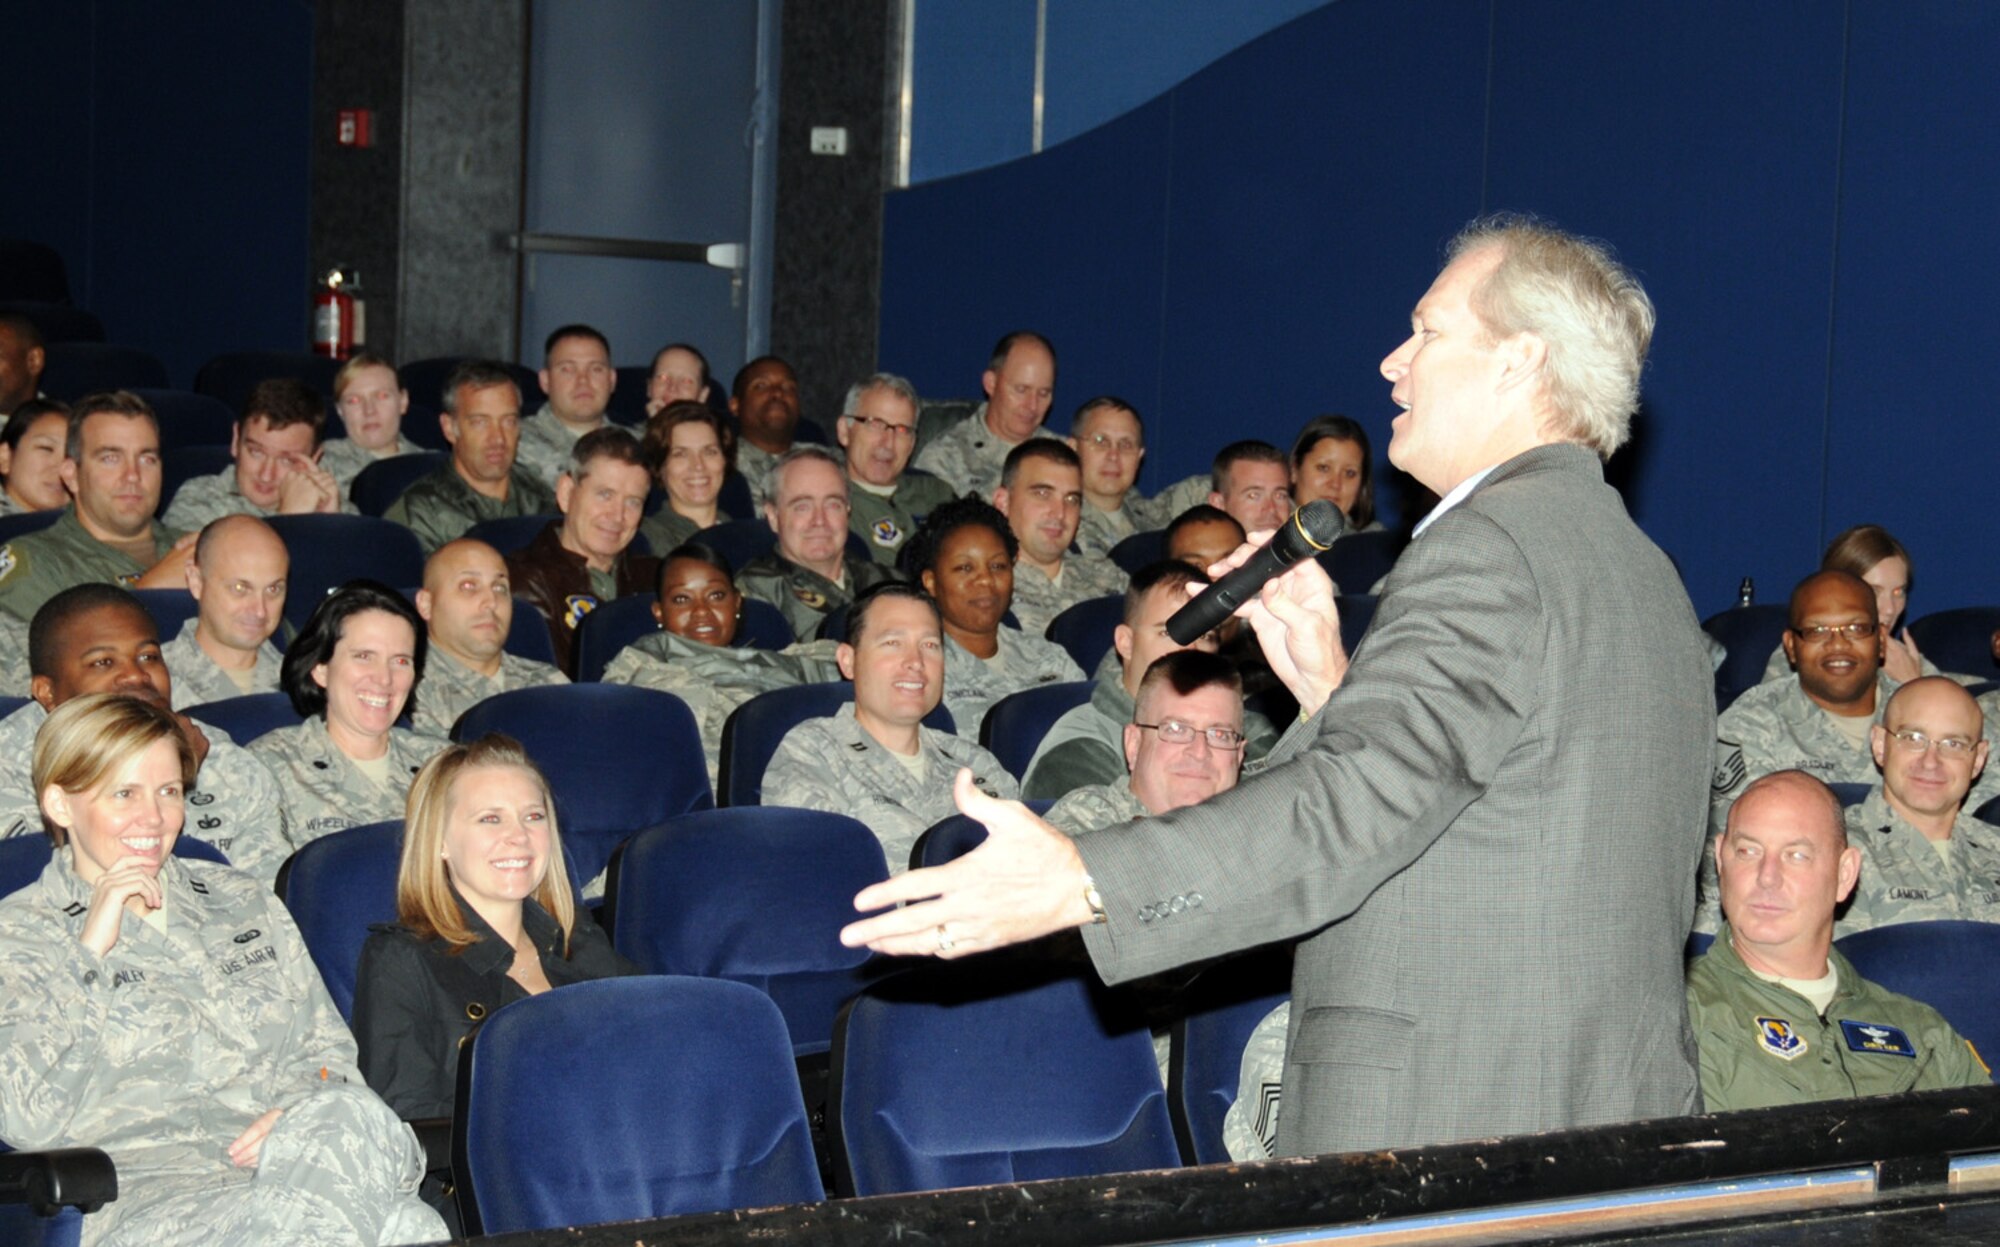 RAMSTEIN AIR BASE, Germany -- Inspirational speaker and best-selling author Dan Clark addresses a gathering of 17th Air Force (Air Forces Africa) Airmen during their Wingman Day Oct. 7, 2011, at the Hercules Theater here. Clark, the former NFL player and author of "Chicken Soup for the Soul" series, is visiting 17th as they prepare to consolidate with Headquarters U.S. Air Forces in Europe and 3rd Air Force in the coming months. (US Air Force photo by Master Sgt. Jim Fisher)